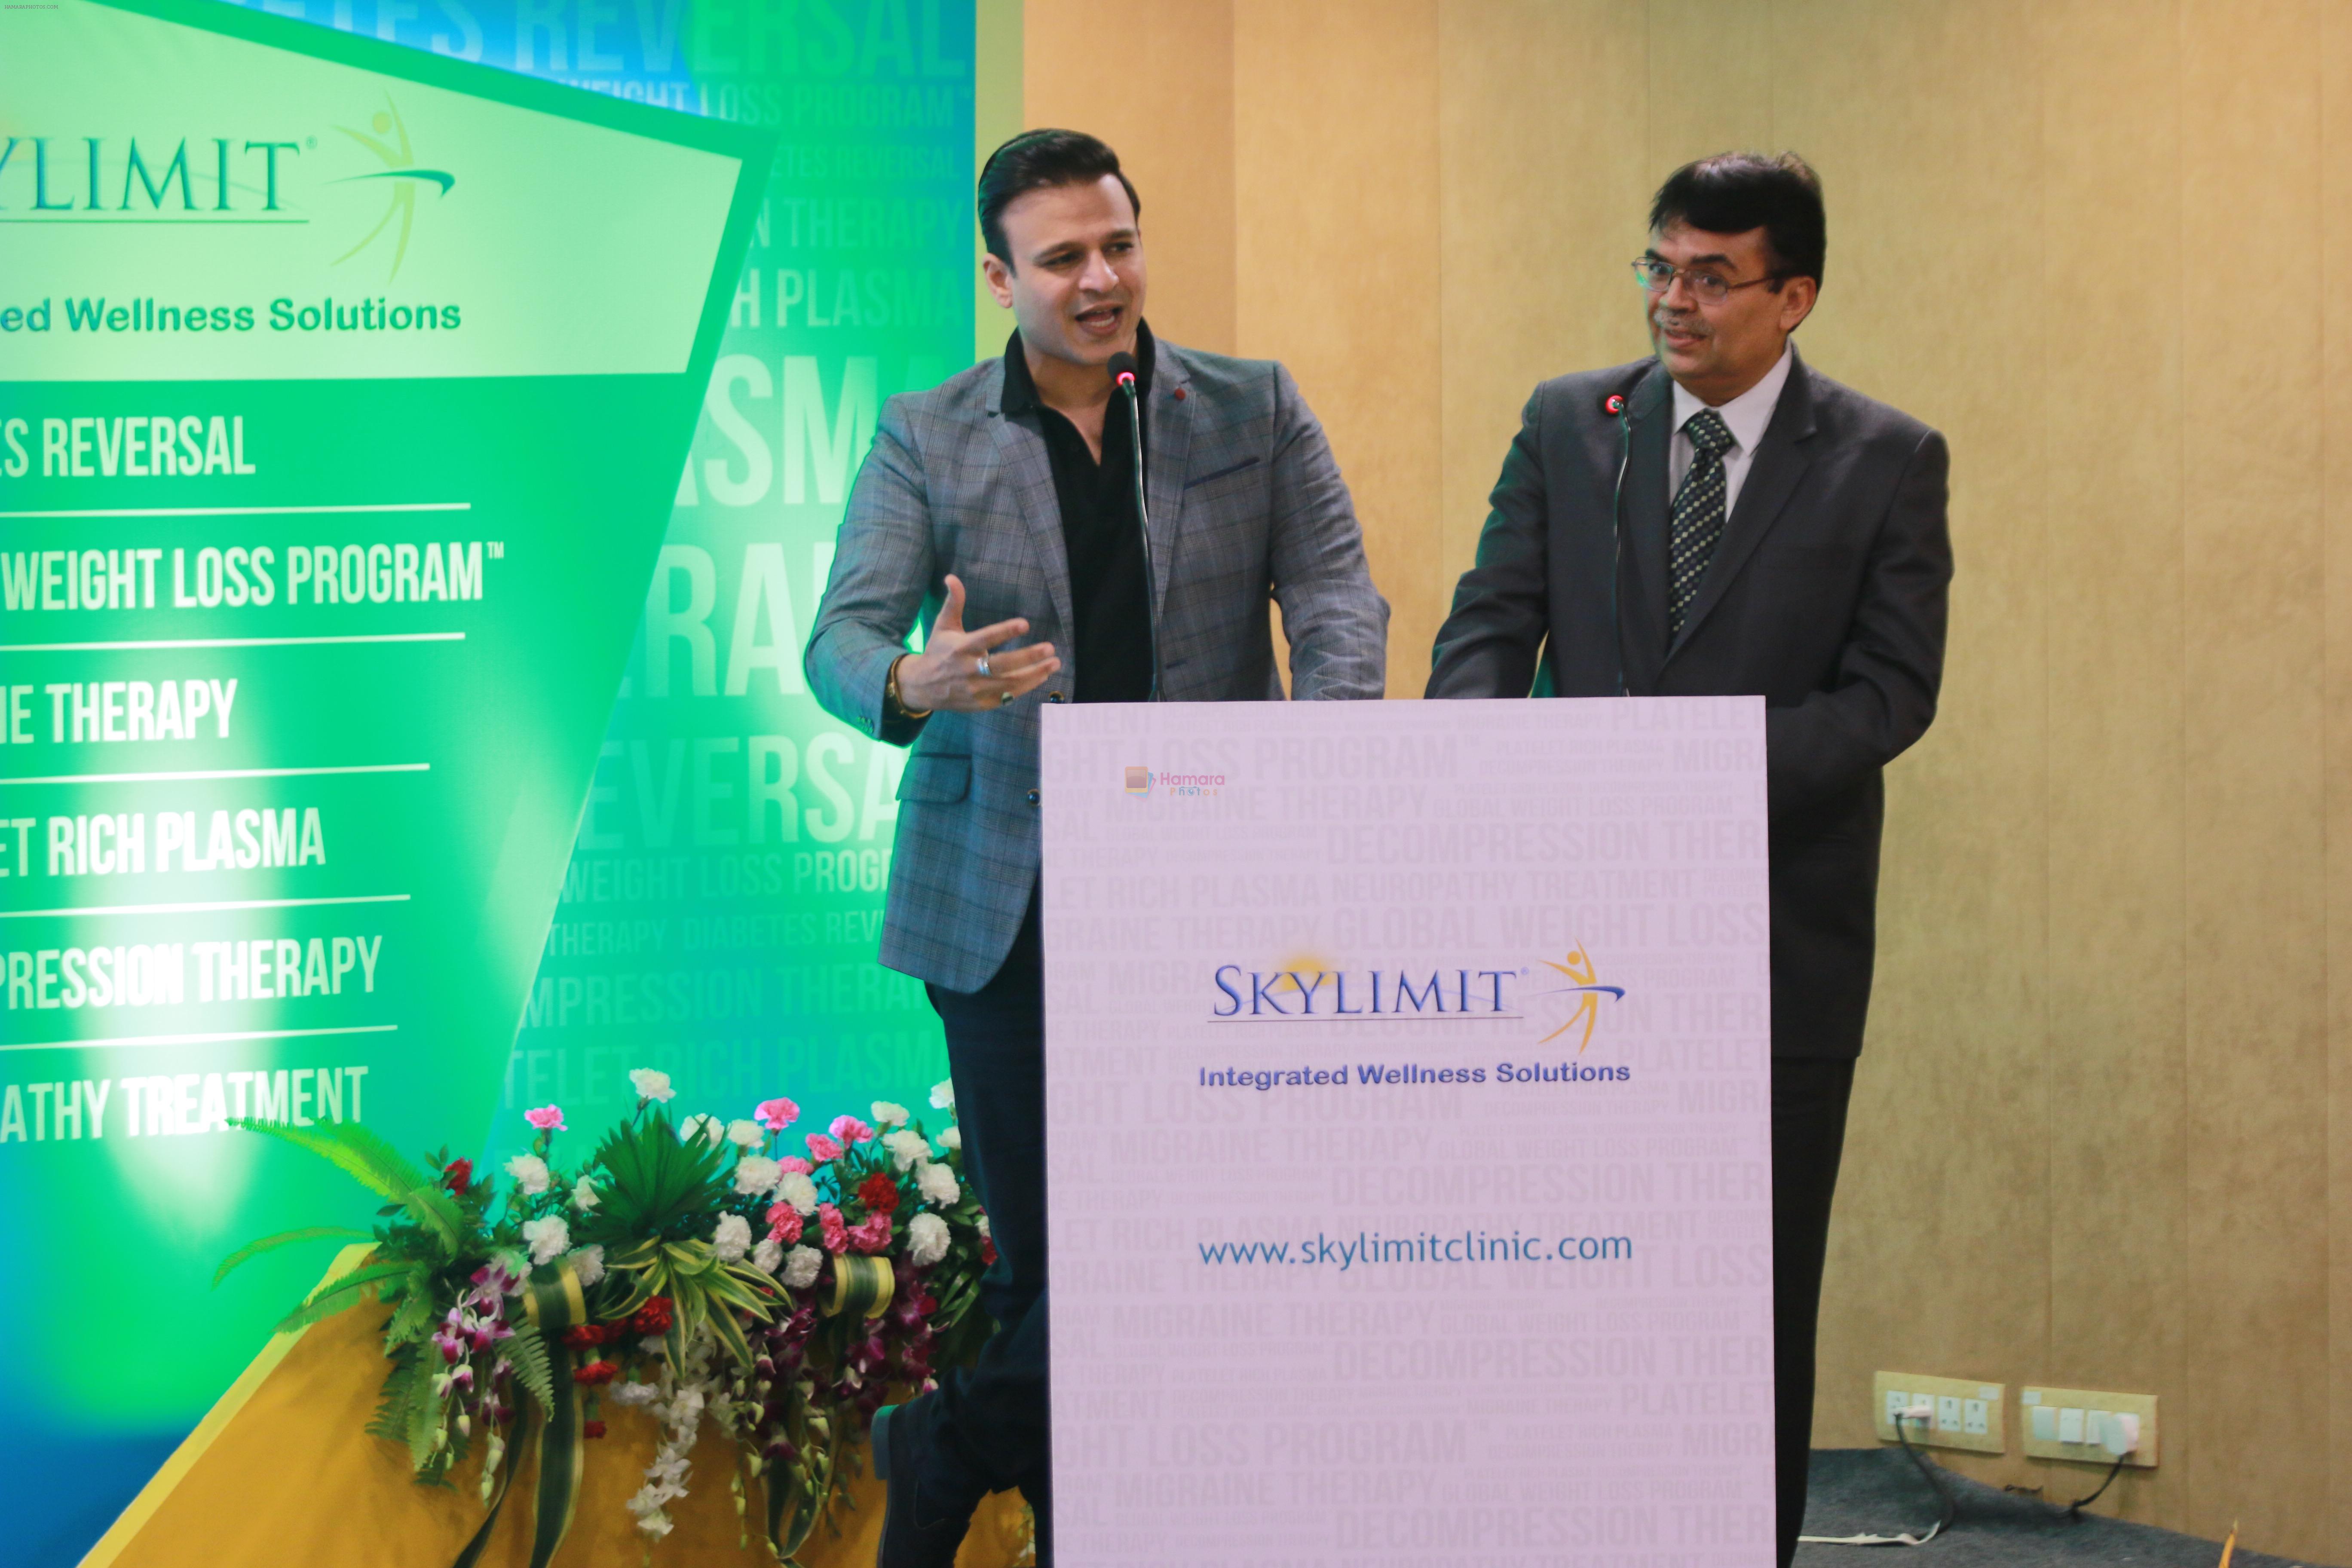 Vivek Oberoi at the inauguration of Skylimit's flagship wellness center in World Trade Center, Mumbai on 5th Aug 2017